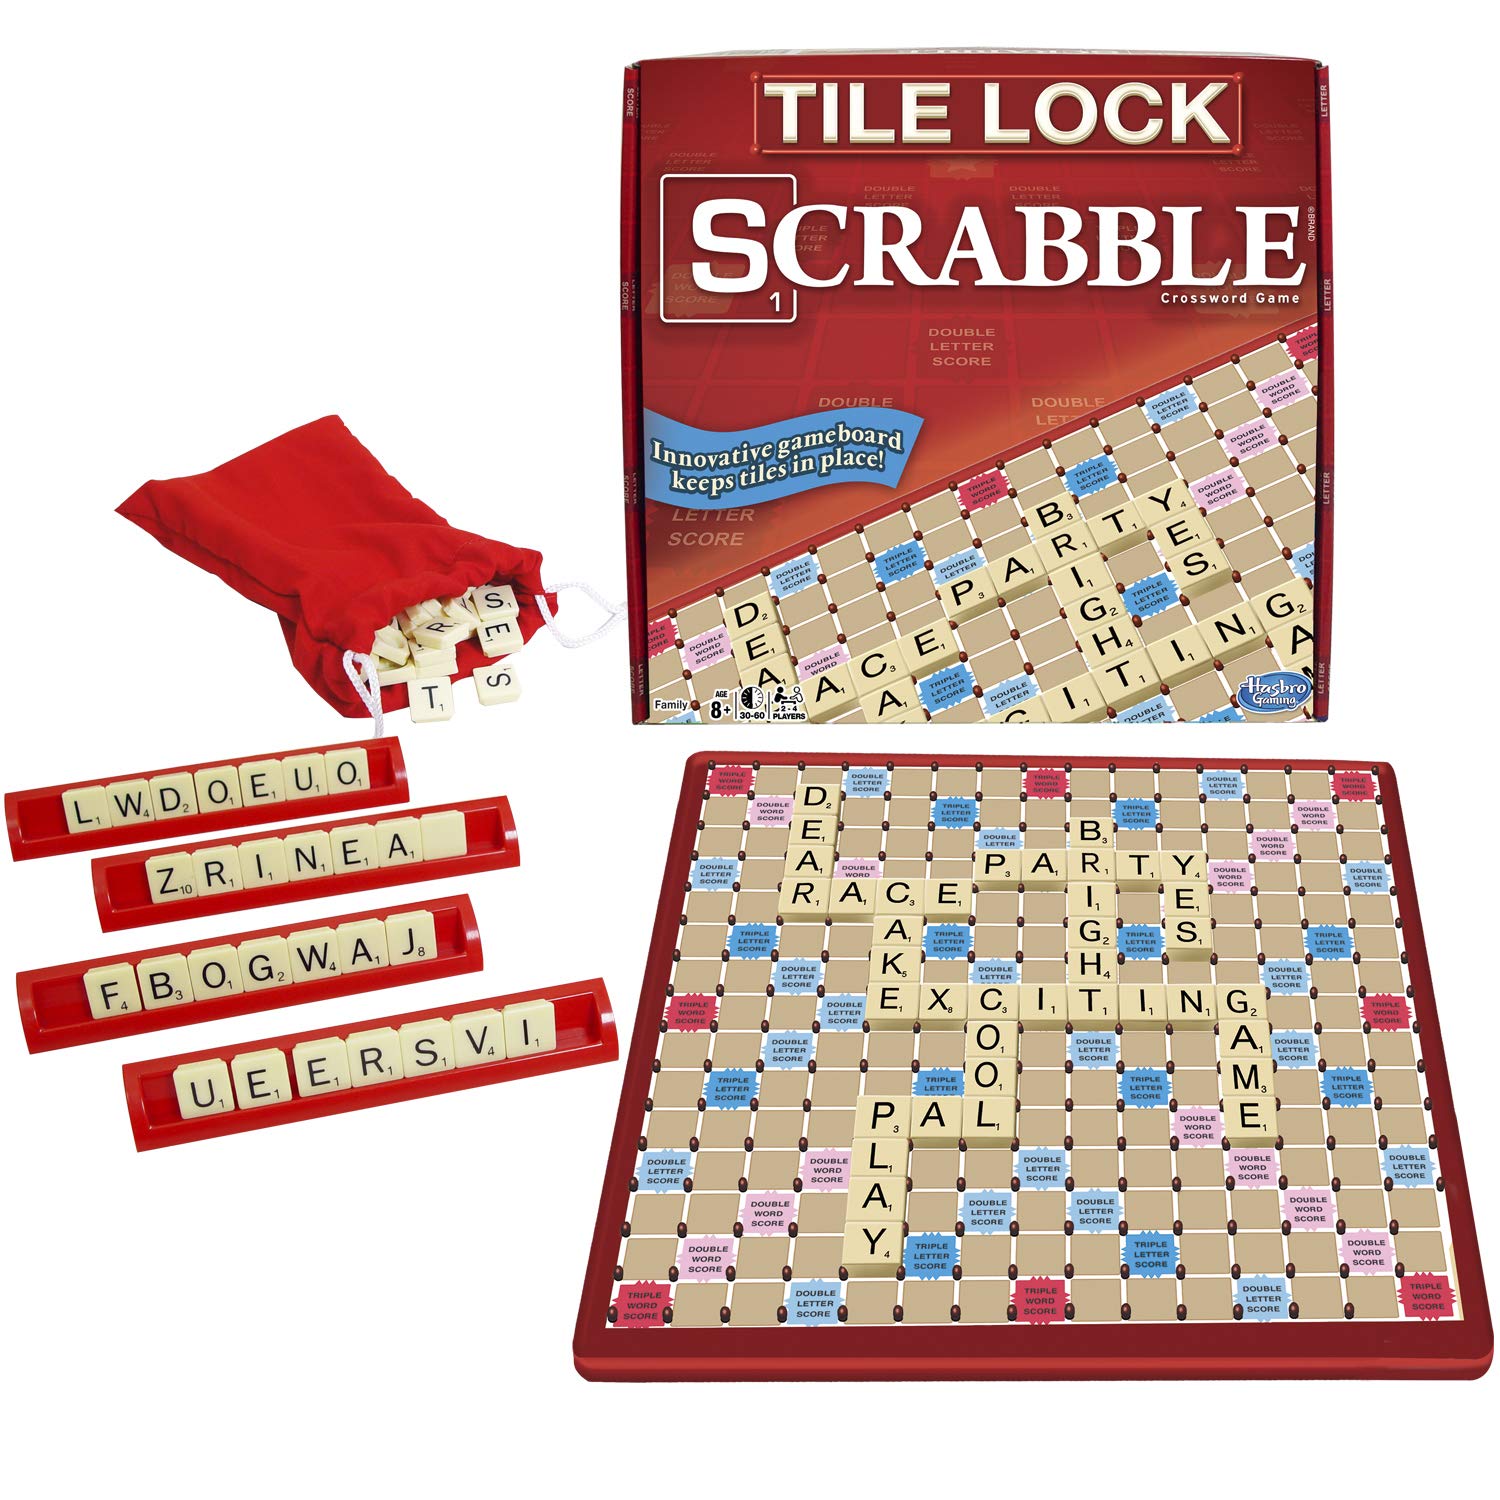 Scrabble game board with letter tiles and a magnifying glass.